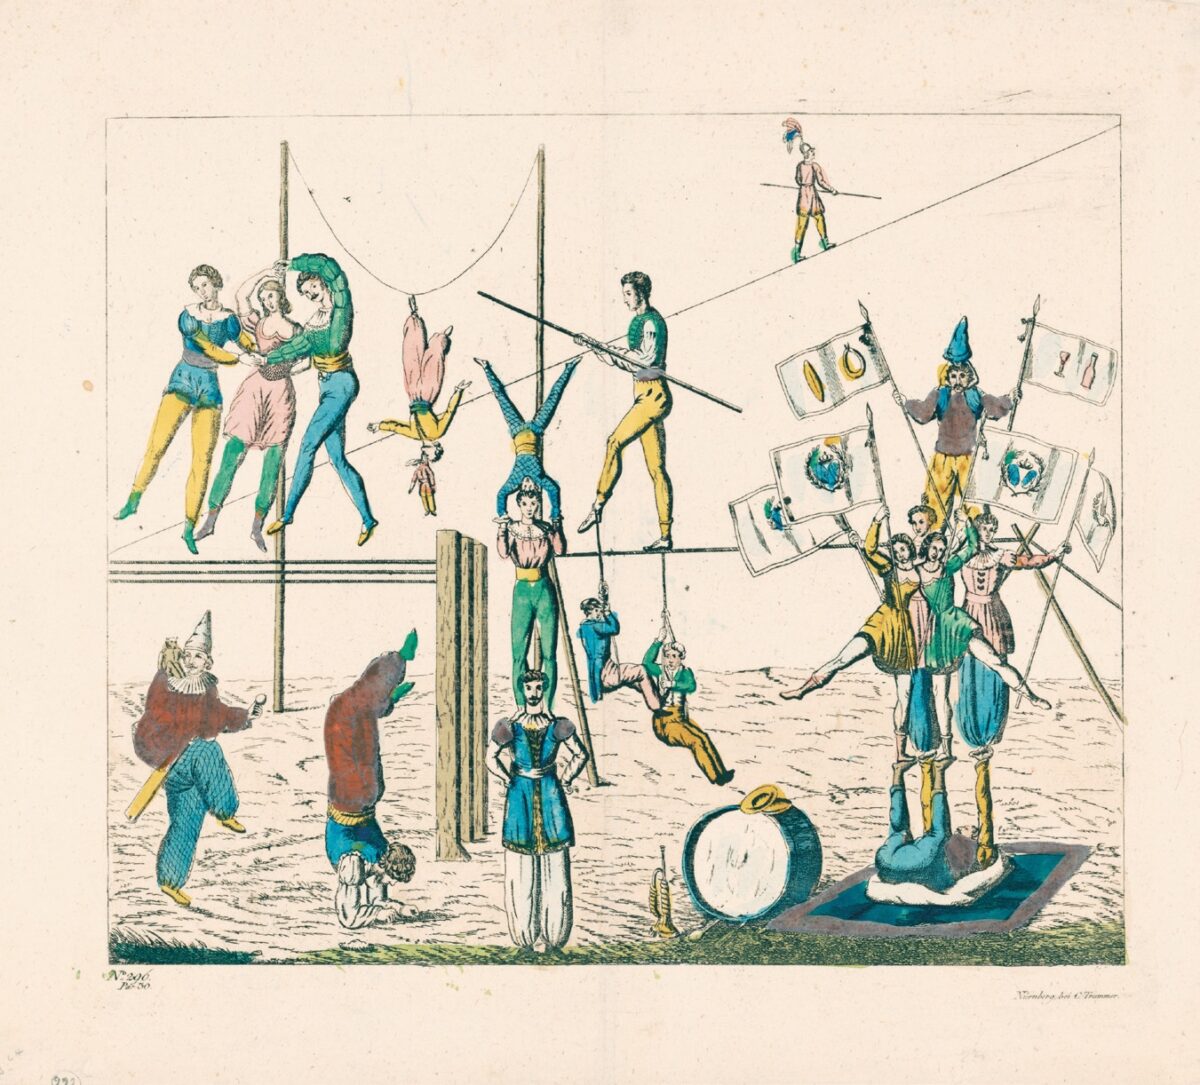 A vintage
illustration of various
circus acts. (Public domain)